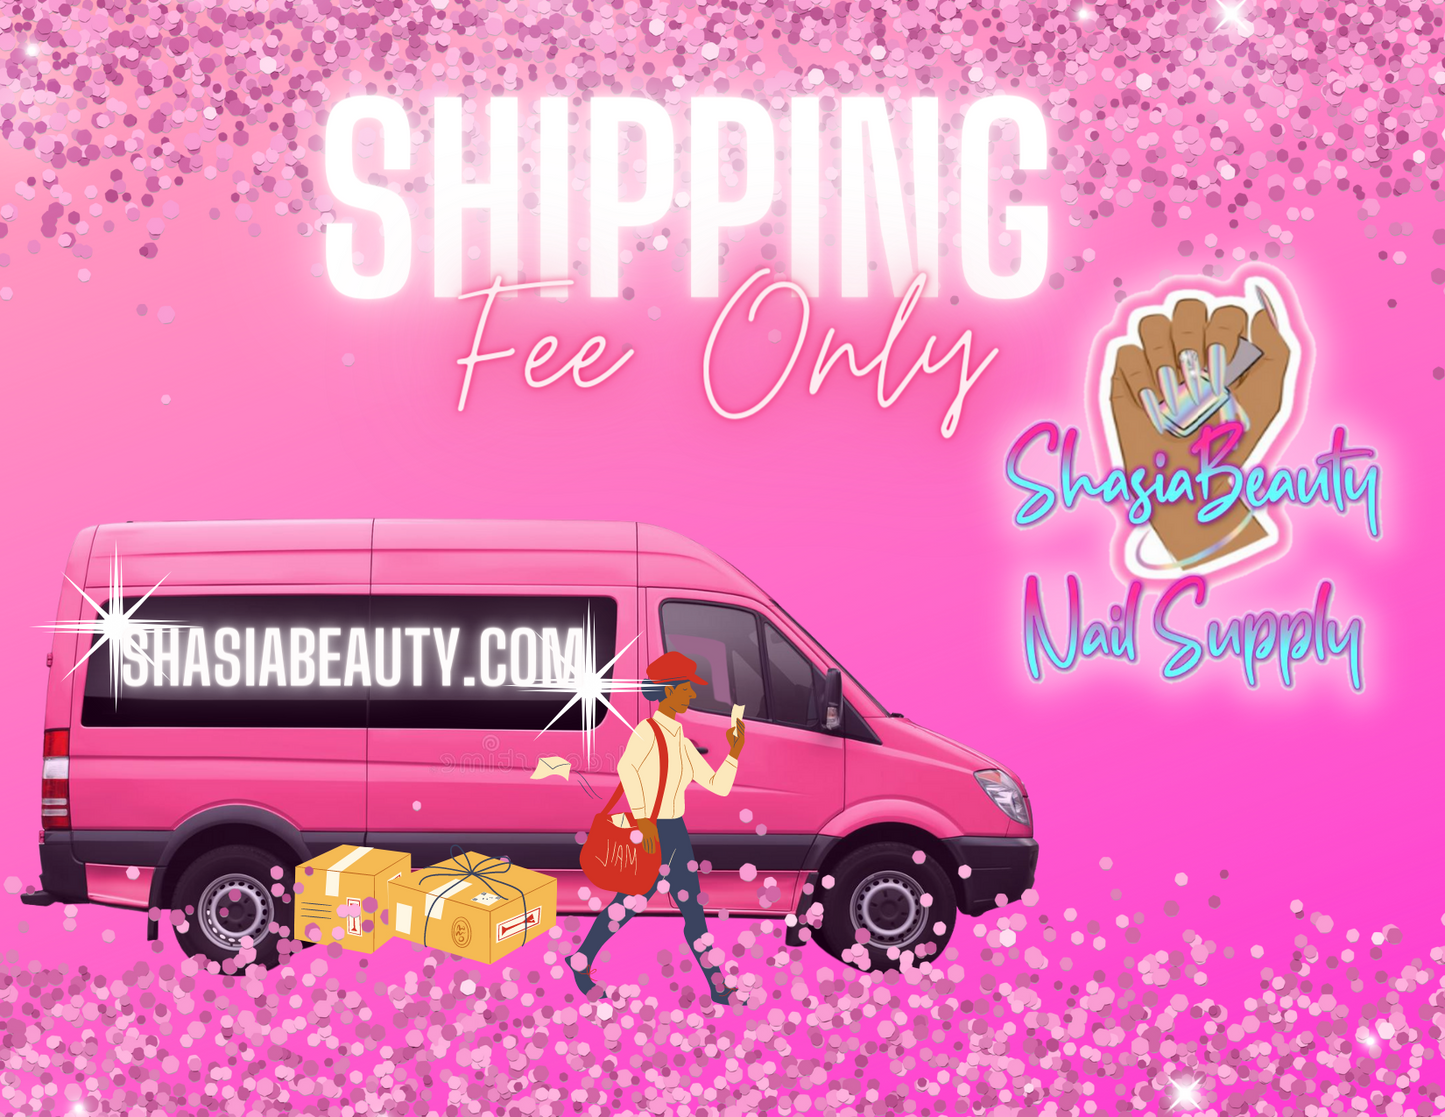 Shipping Fee Payment Only!